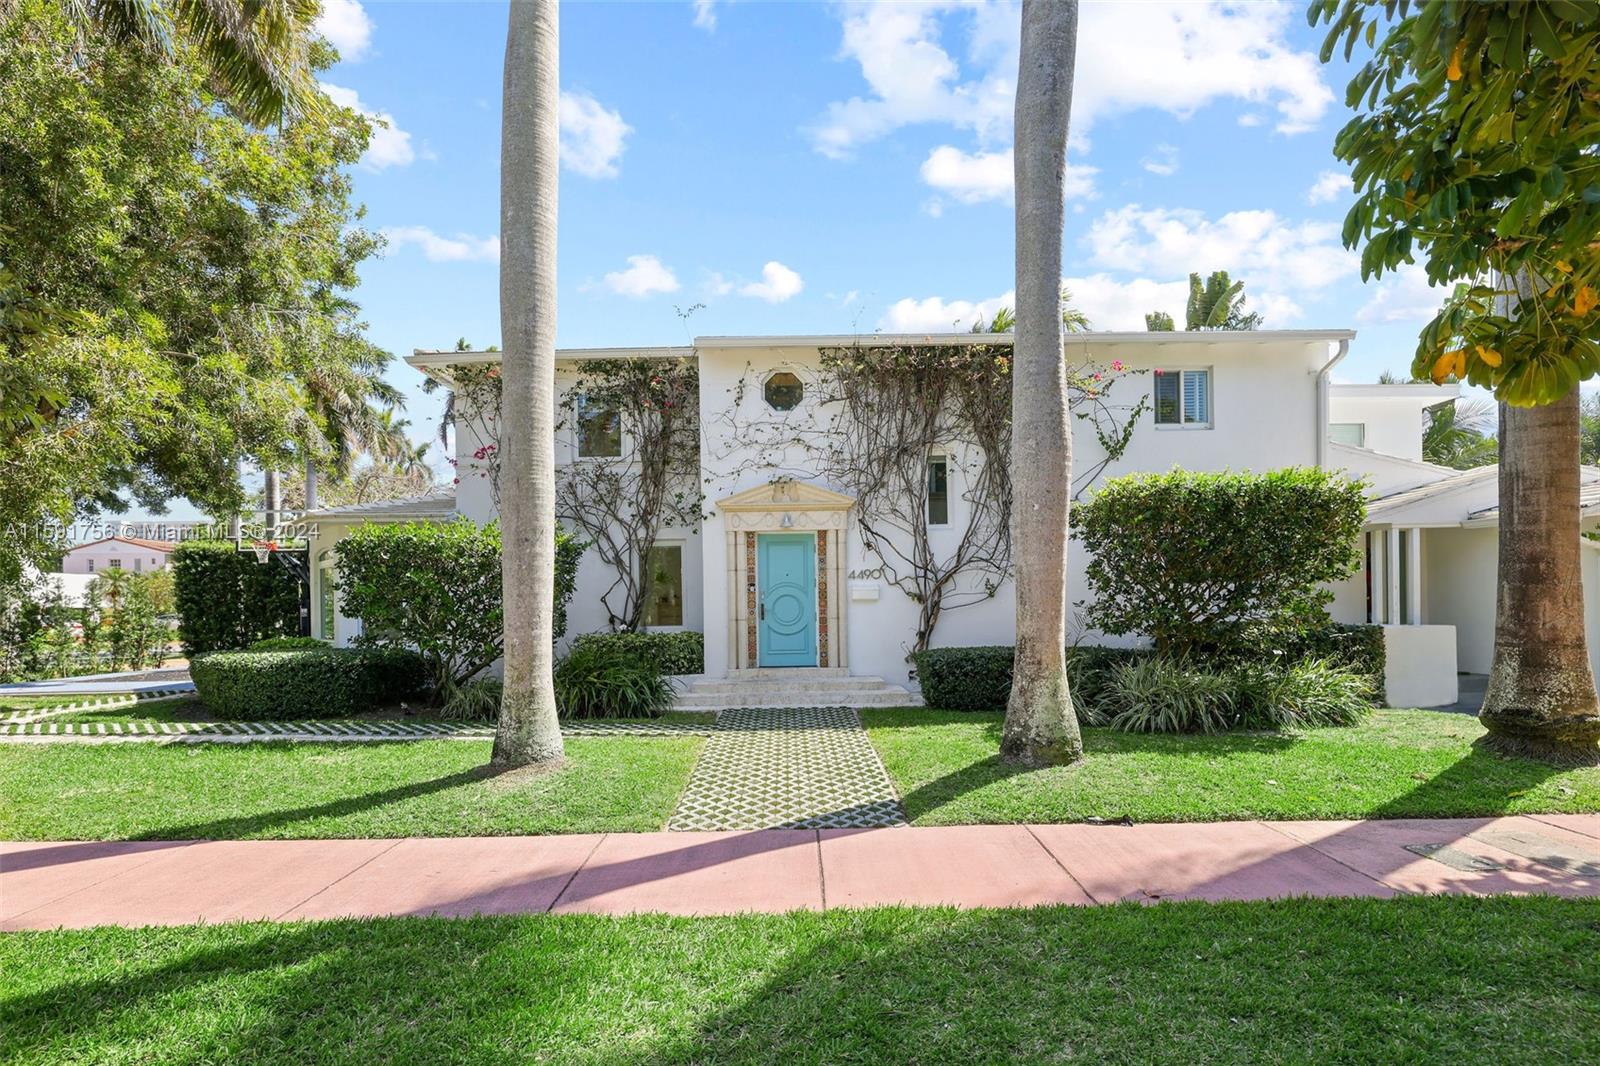 Step into luxury at this fully renovated, 2-story Miami Beach home, located on a stunning tree-lined street. This corner lot residence offers a perfect blend of elegance and convenience. Features include a grand marble fireplace, beautifully updated bathrooms, a large kitchen with modern cabinets, stainless steel appliances (including a wine refrigerator), original wood floors, and more. Outside, you'll find an expansive pool and yard area, along with a basketball court and an office space accessible via outside stairs, providing a versatile area for work or relaxation. With its close proximity to the shops and dining on 41st street, the beach, and easy access to the Design District, Downtown Miami, and the airport, this captivating home offers the best of Miami Beach living.